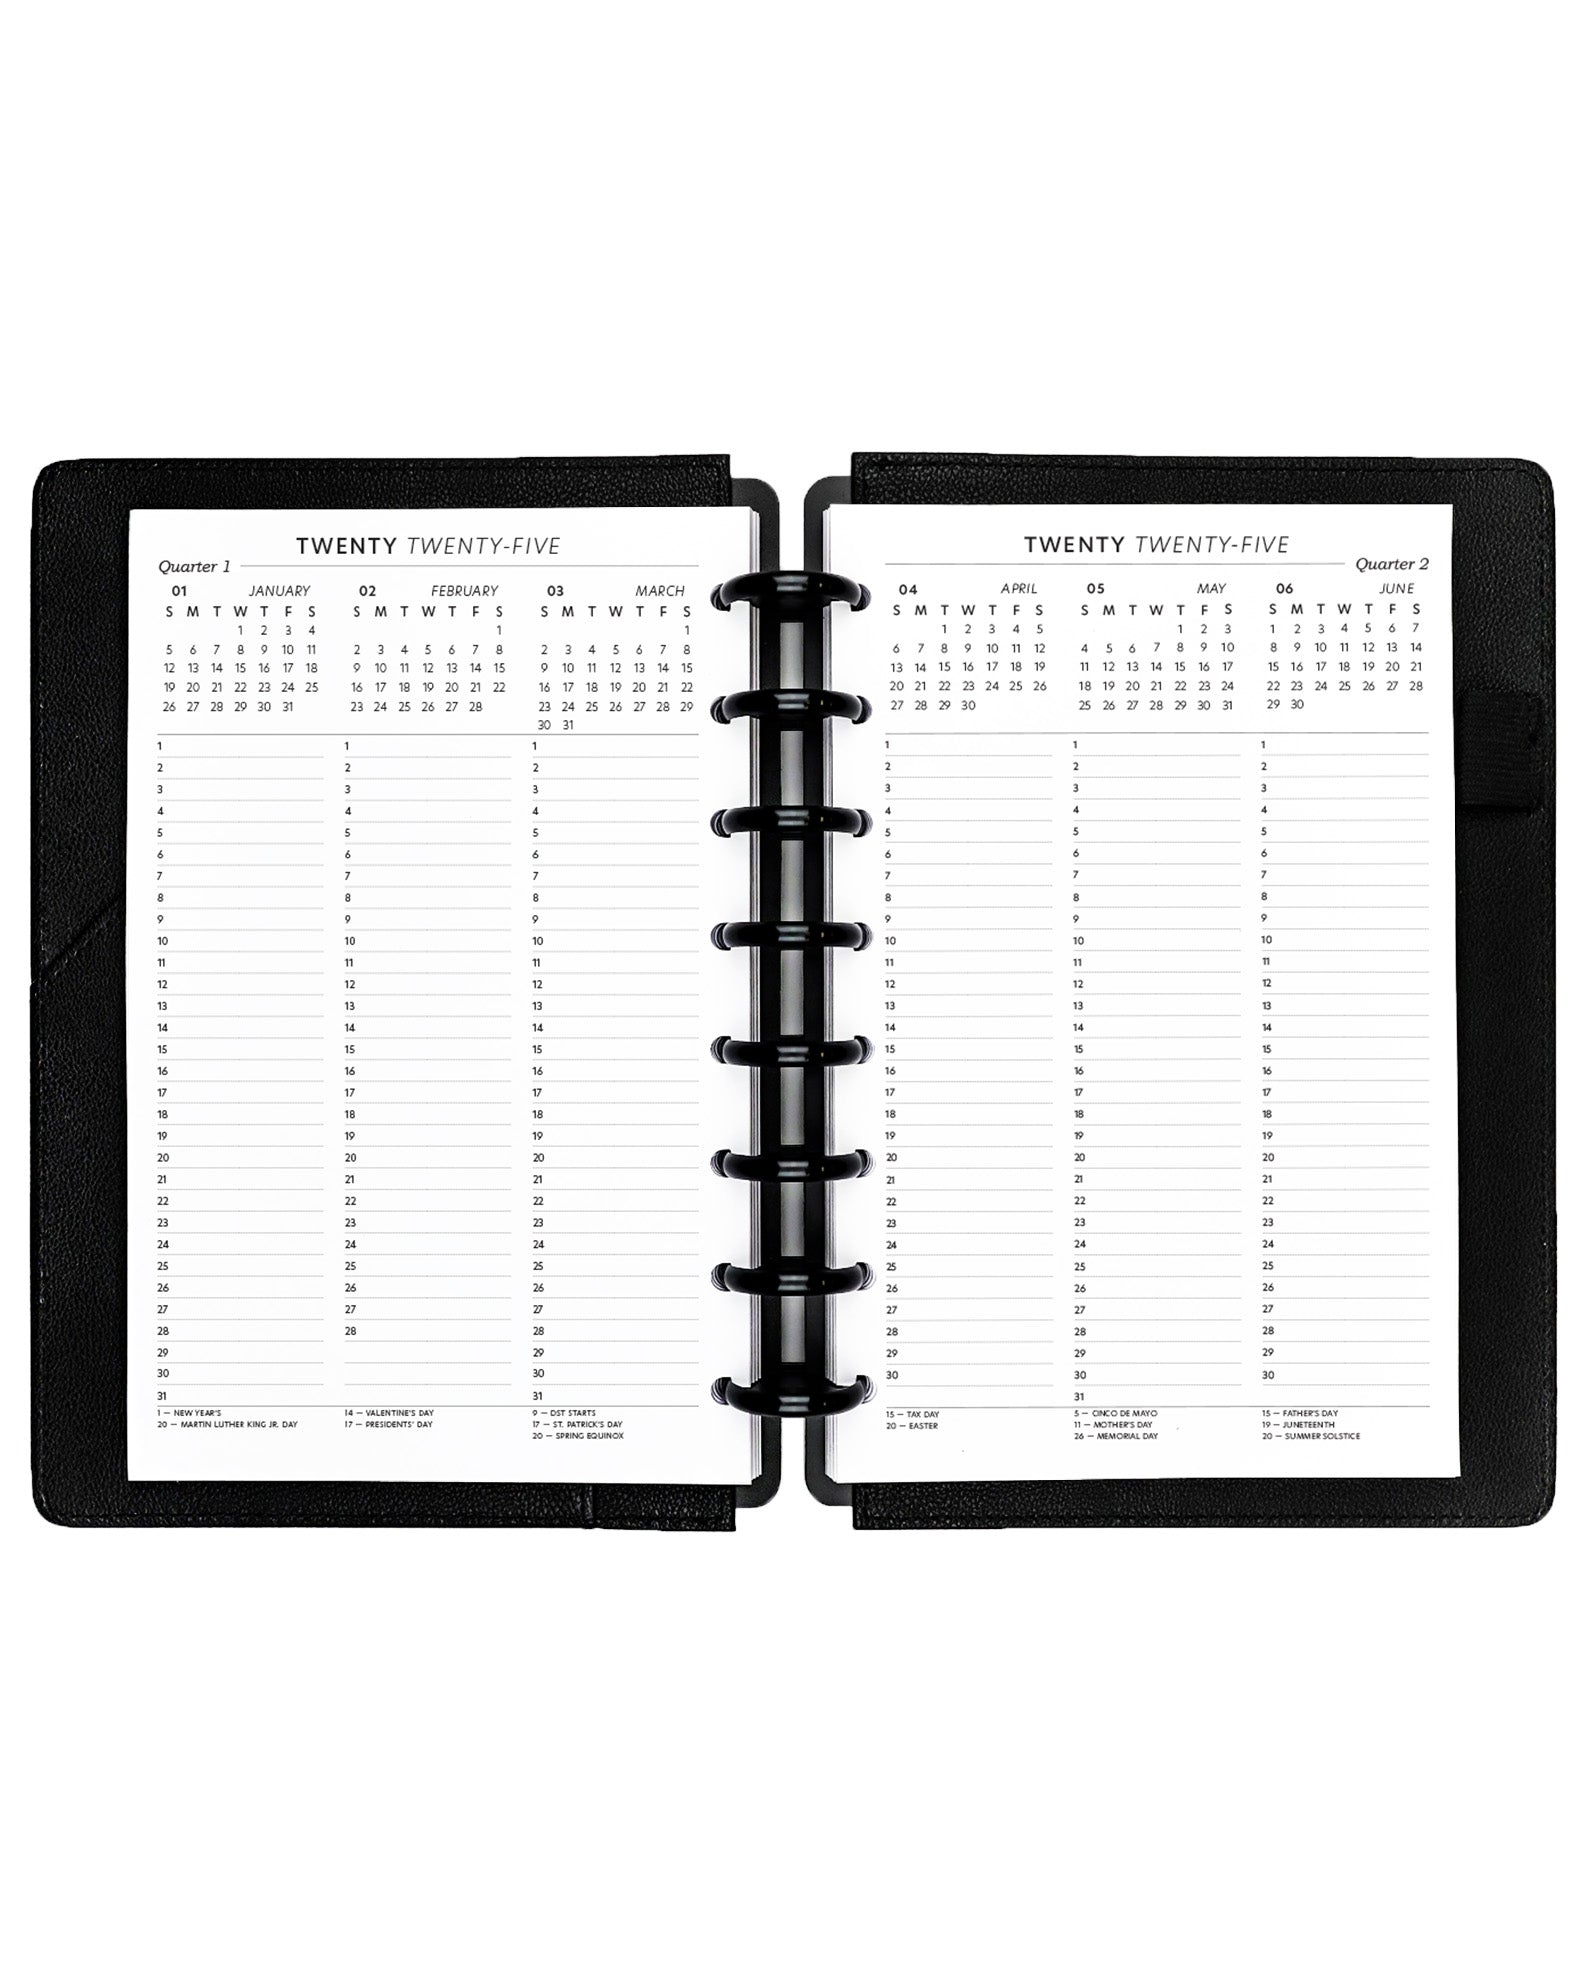 Quick glance calendar inserts planner refill pages for discbound planners, disc agendas, disc notebooks, and A5 siz e ringbound planner systems by Jane's Agenda.